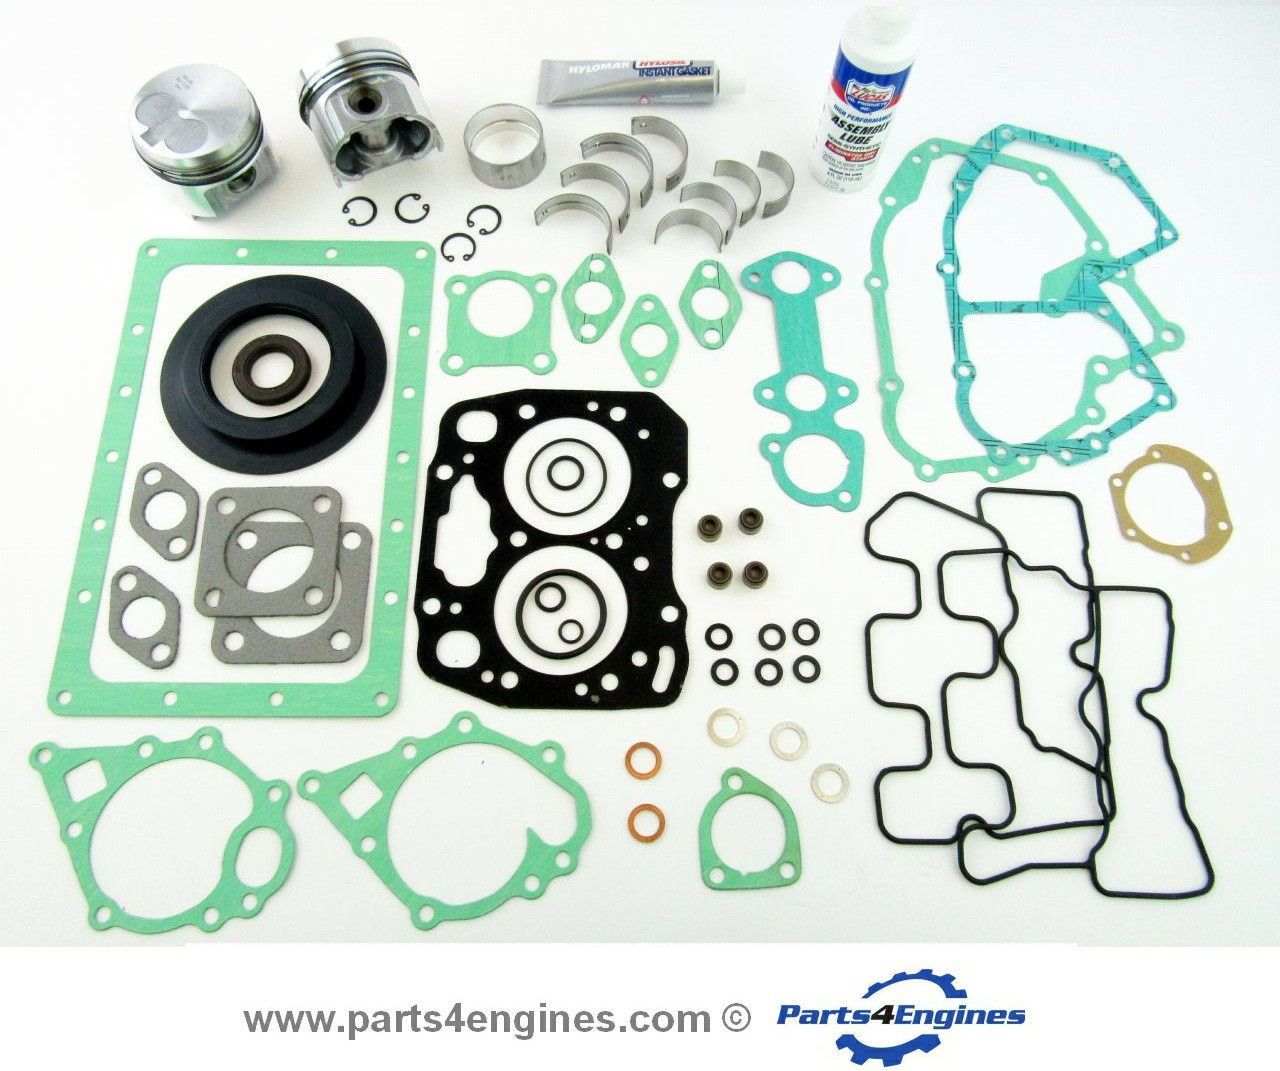 Volvo Penta D1-13 Overhaul kit, from parts4engines.com